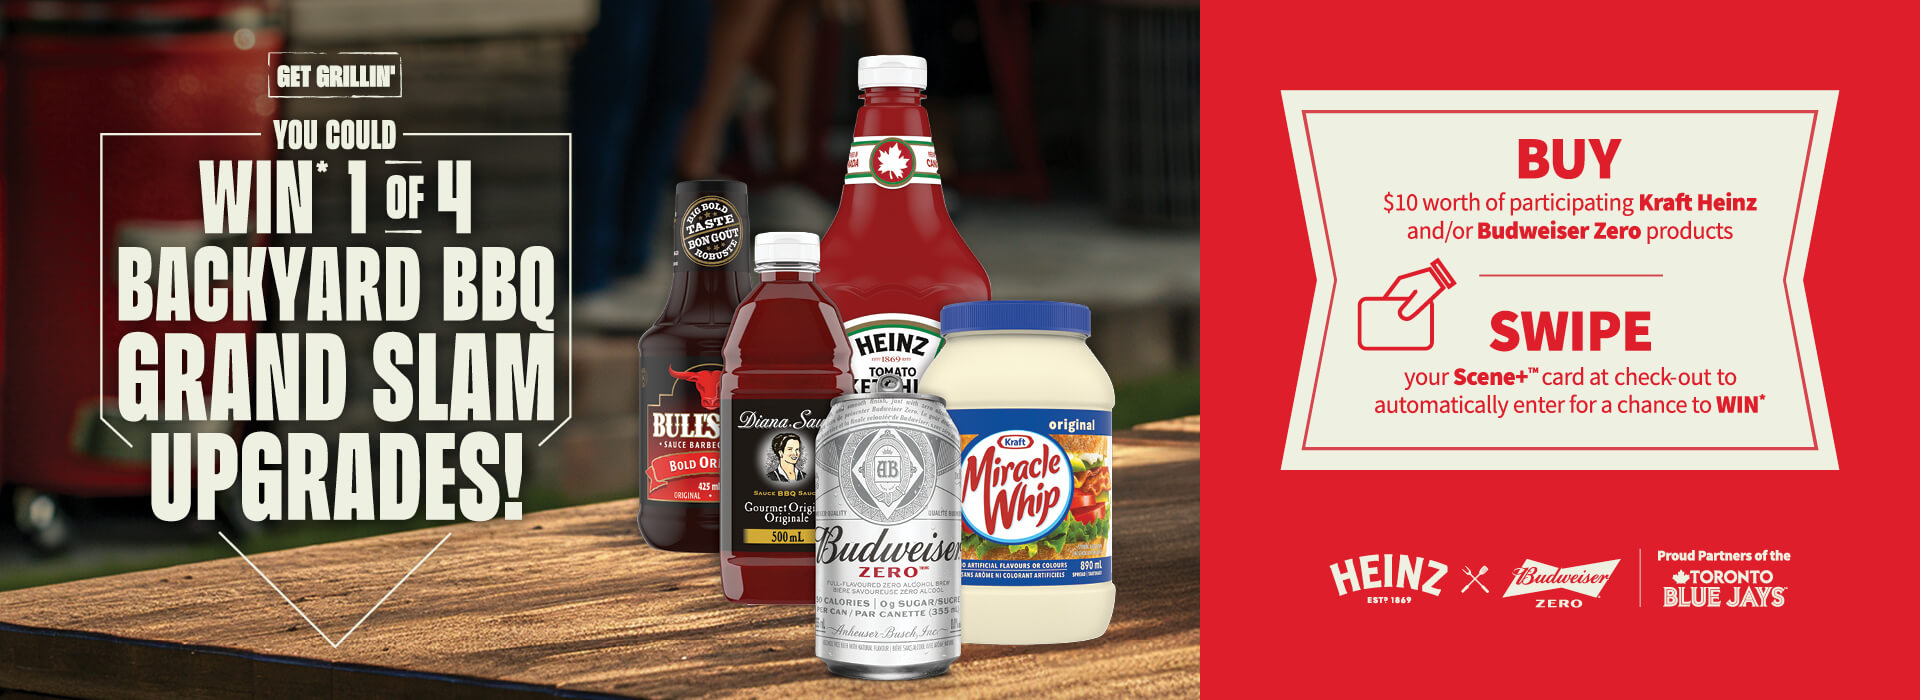 Kraft x Budweiser Zero Contest Image - Enter for a chance to win a 1 of 4 Backyard BBQ Grand Slam Upgrades